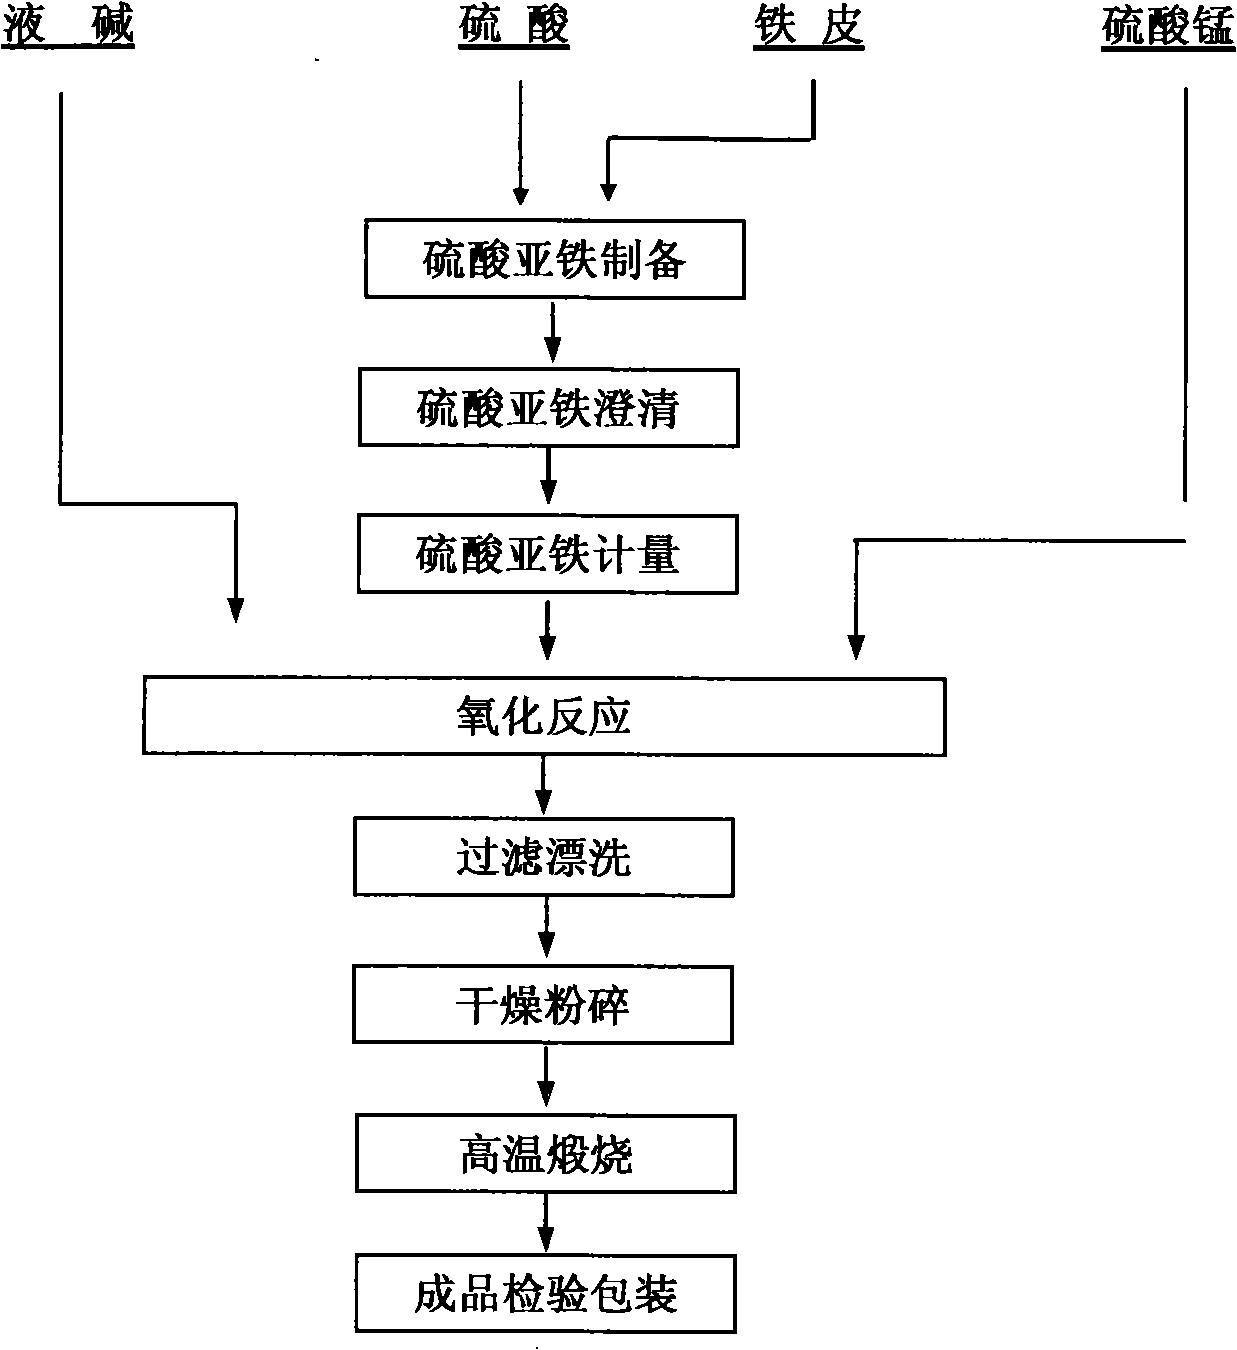 Fire resistant black iron oxide pigment and preparation method thereof